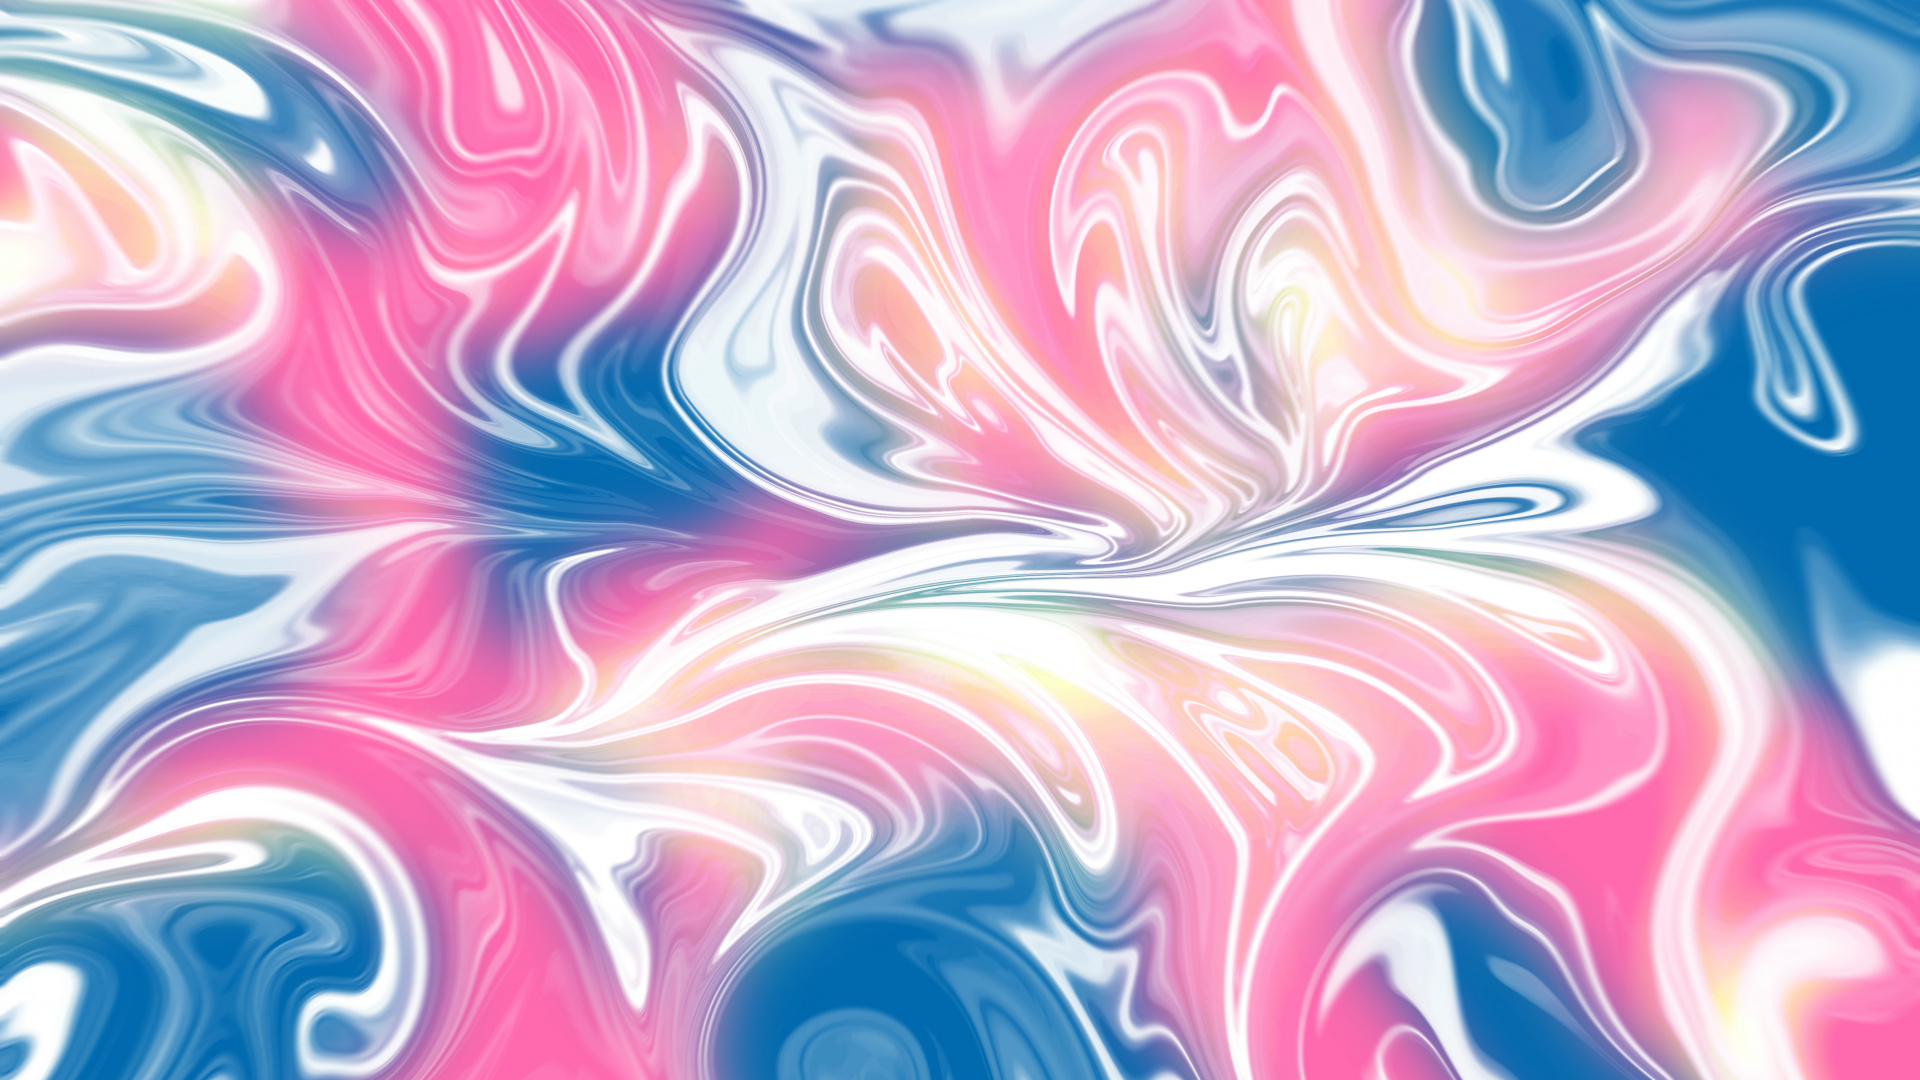 Pink White and Blue Abstract Painting. Wallpaper in 1920x1080 Resolution